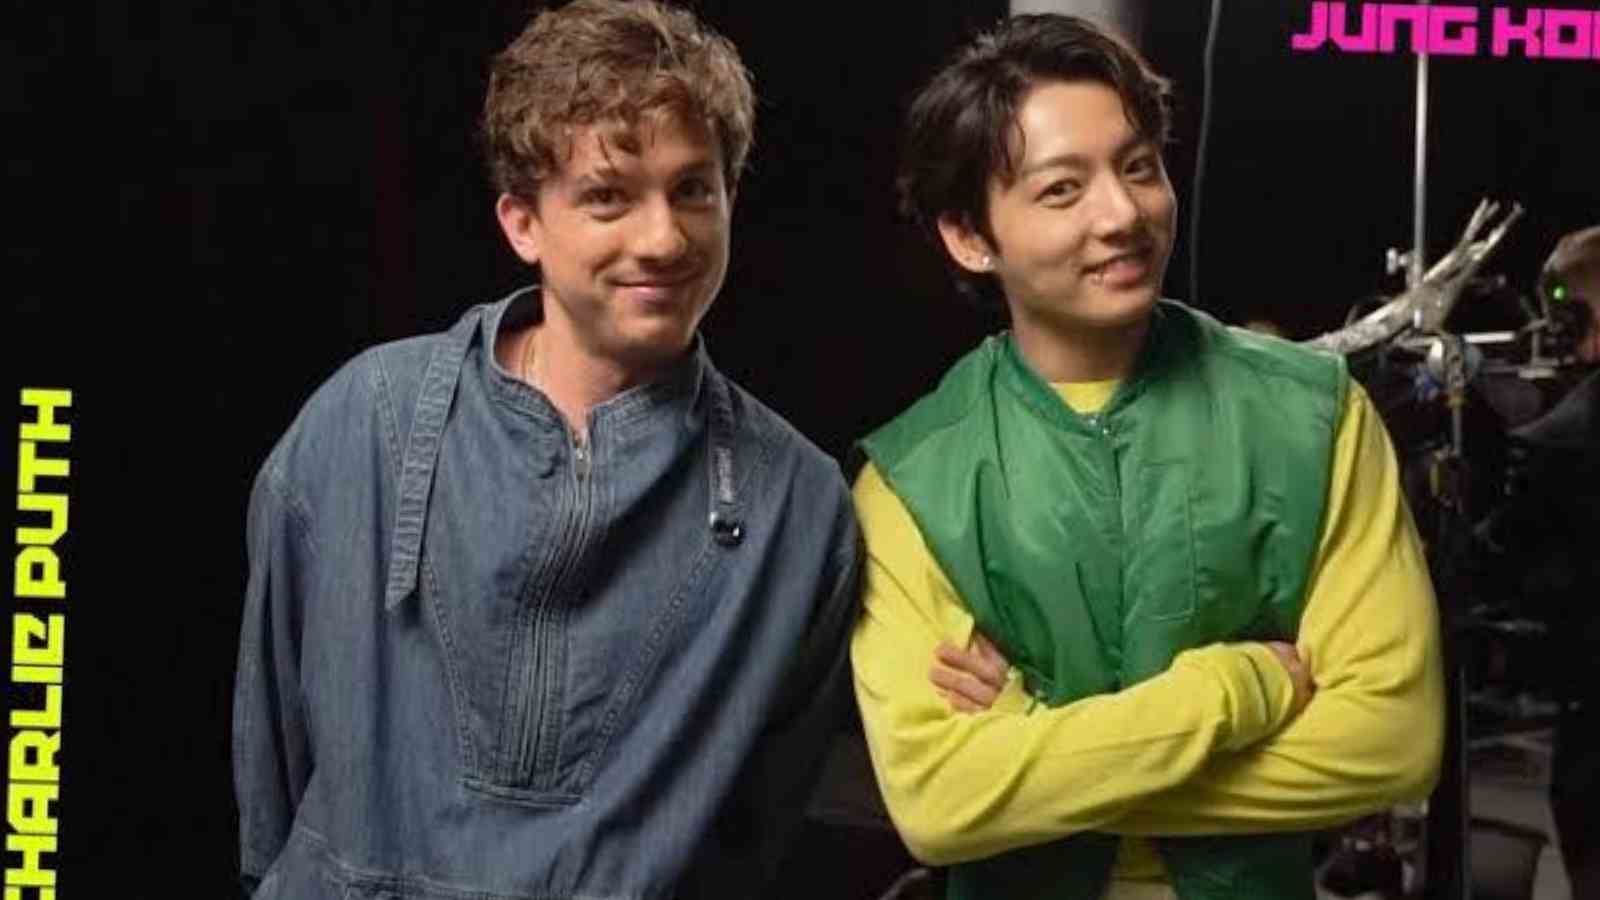 Is Charlie Puth Gay? Was He In A Relationship With BTS' Jungkook?